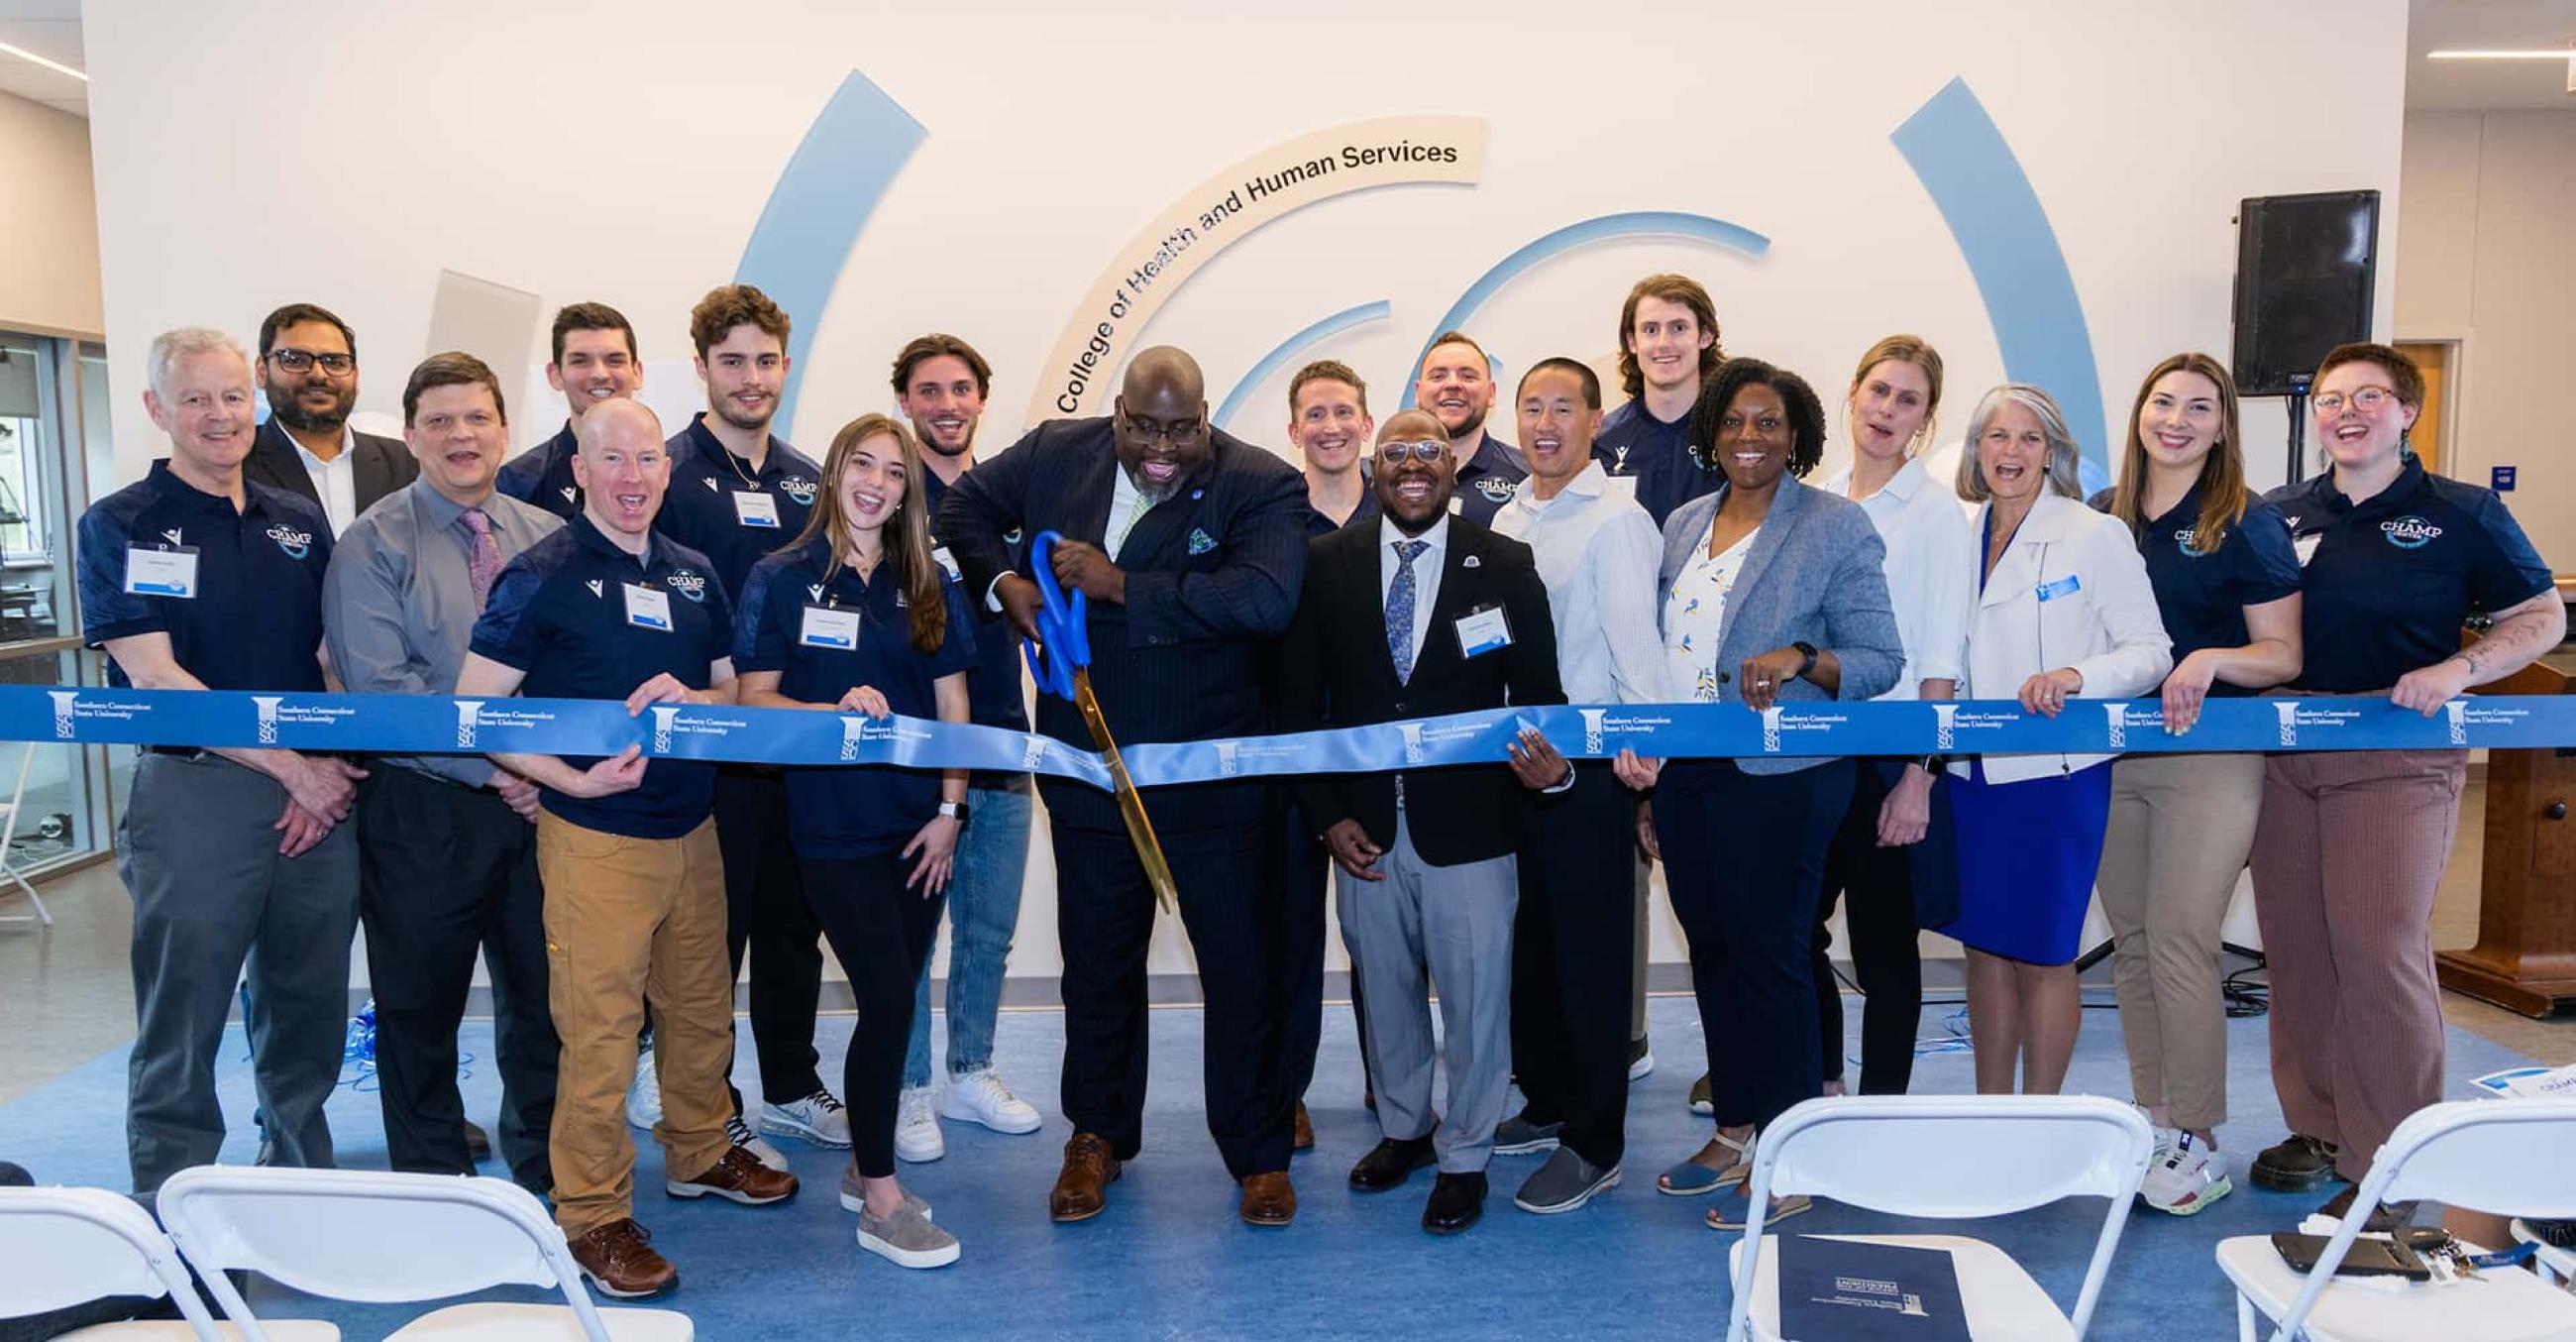 the ceremonial ribbon-cutting to open CHAMP, featuring faculty, staff, and students of the College of Health and Human Services and Interim President Dwayne Smith